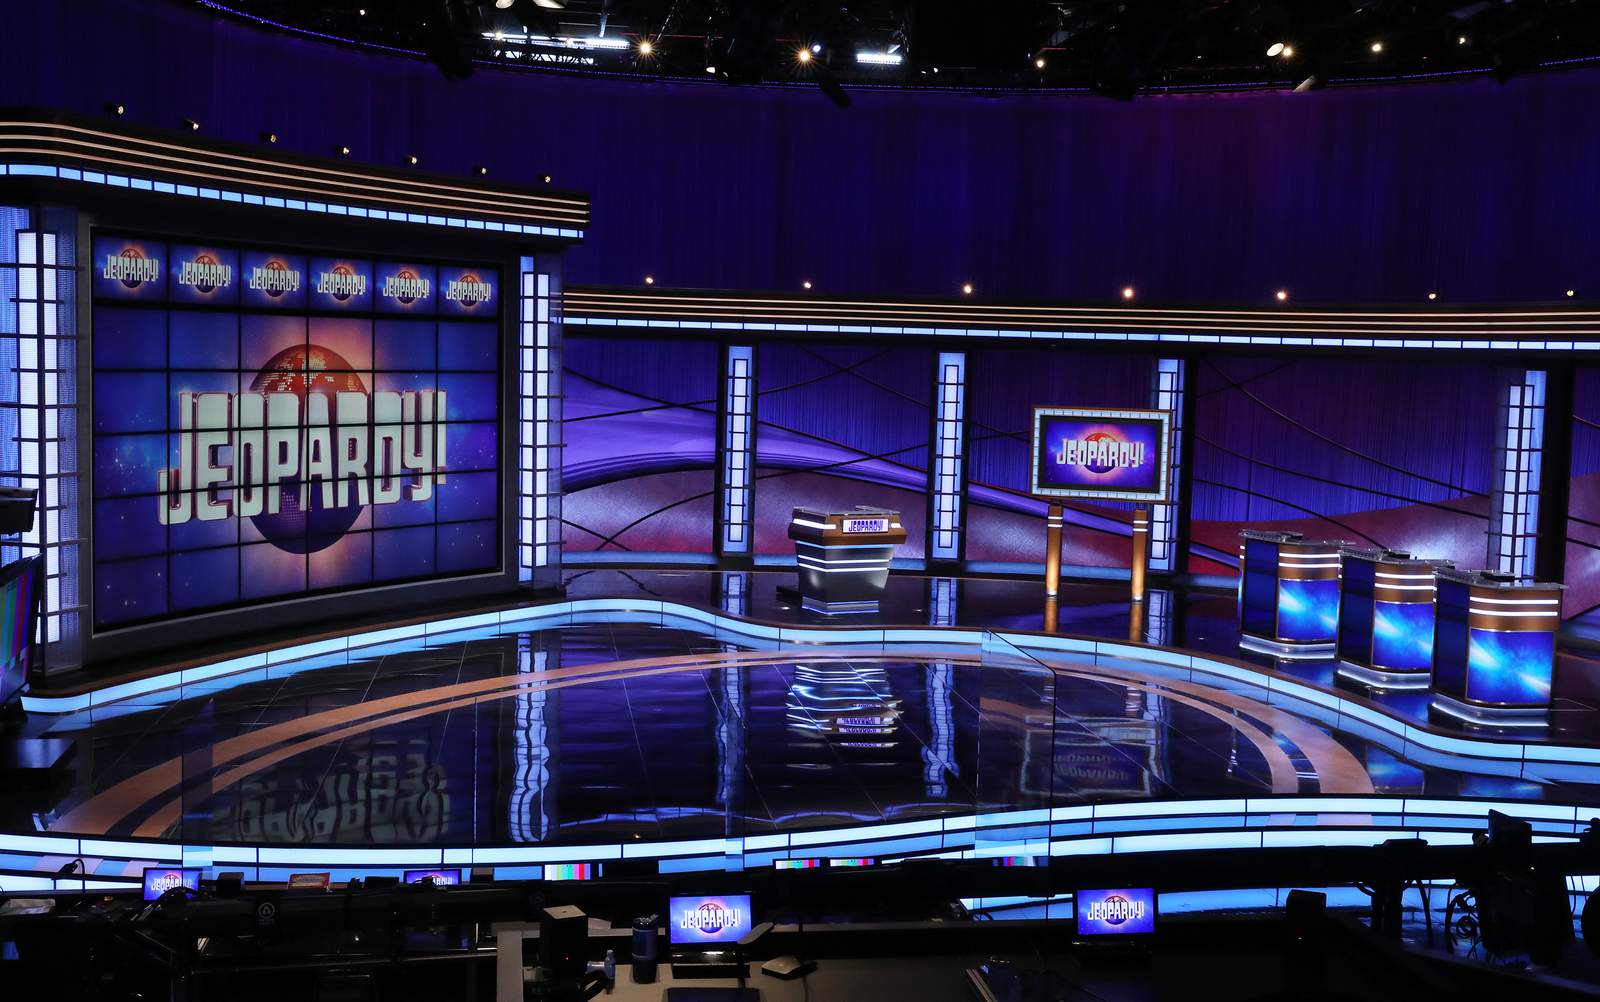 'Jeopardy!' returns with new setup and new role for Jennings